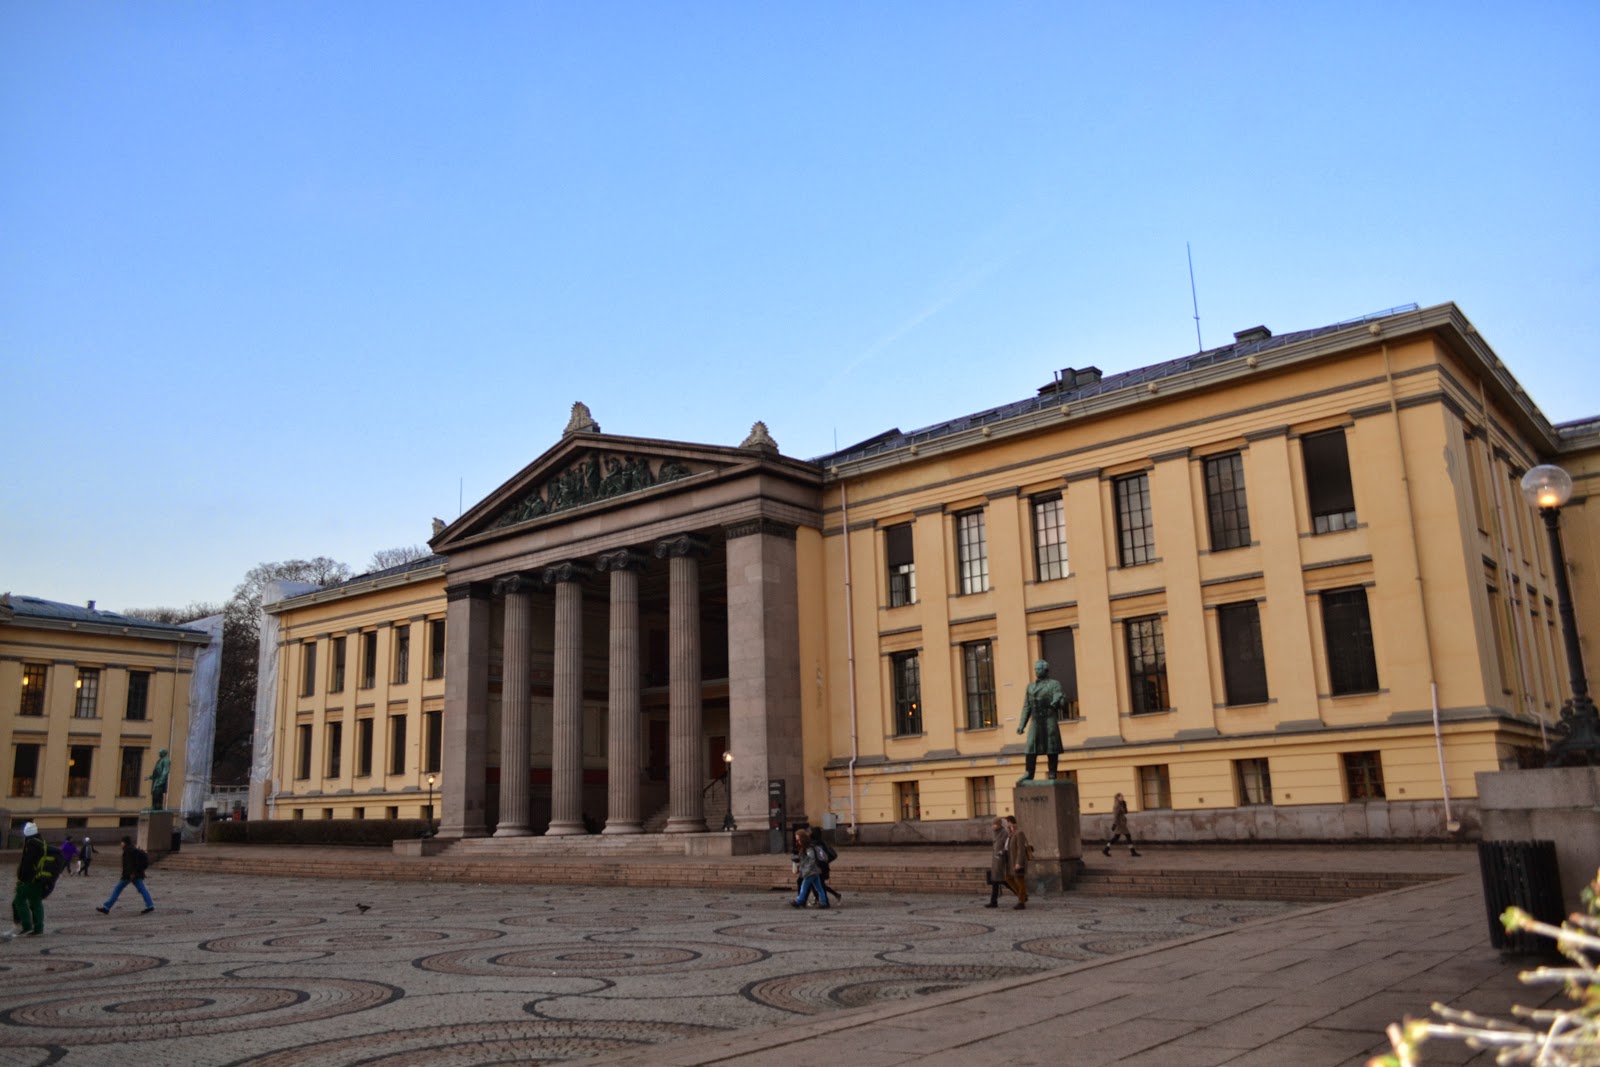 Travel diary of an idiot: OSLO, NORWAY